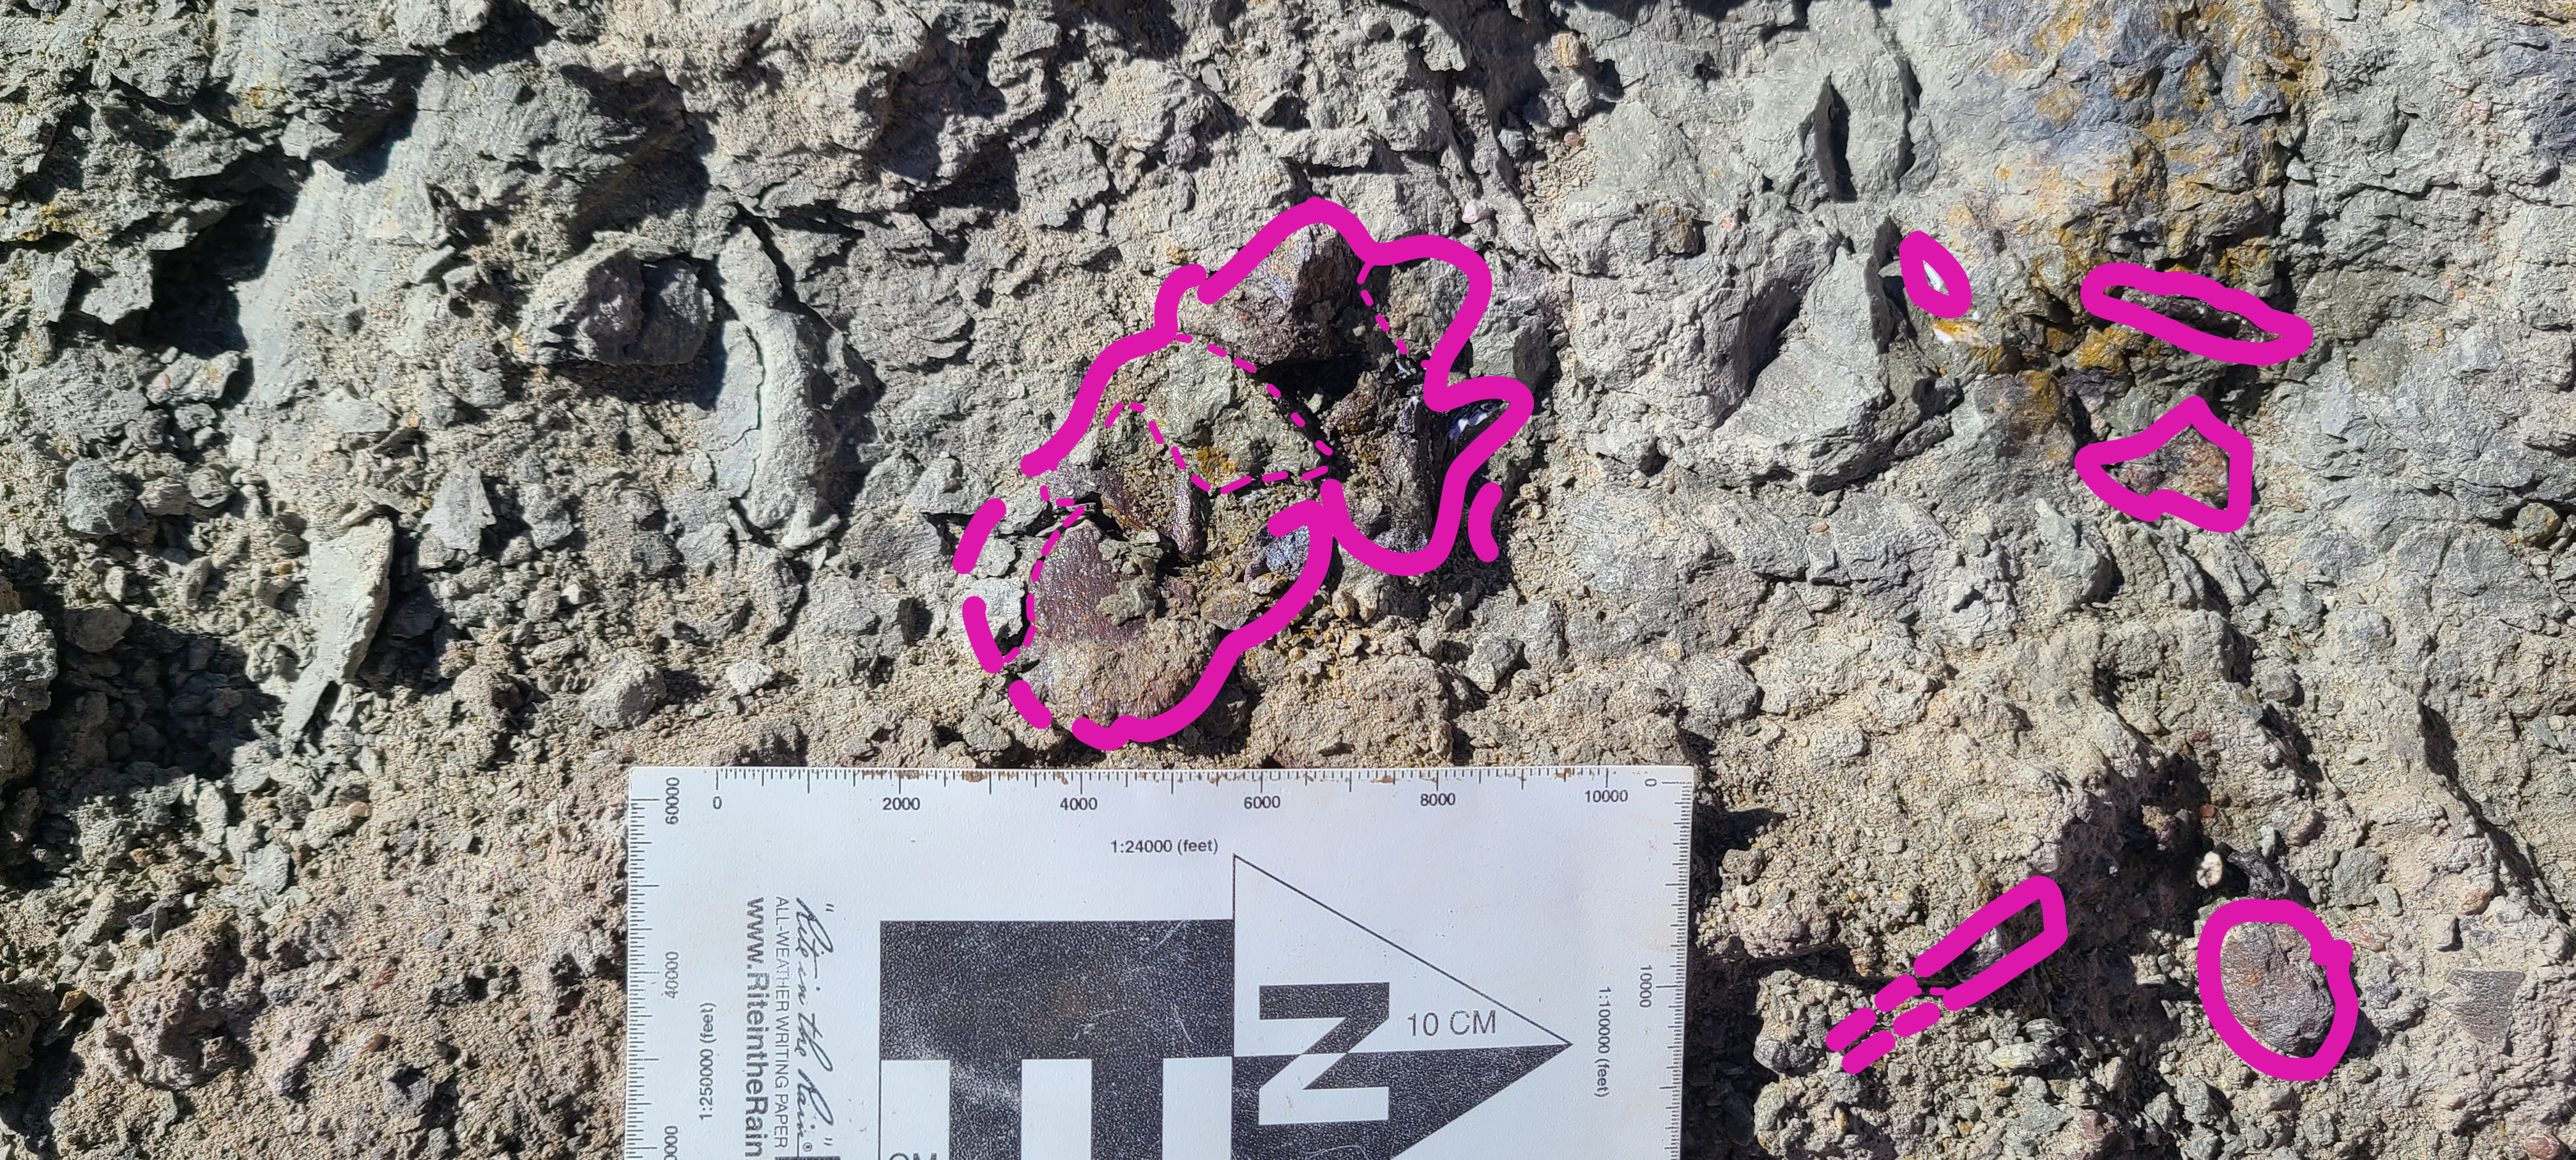 Phytosaur bones from southeastern Utah, outlined, as they were found by the team.